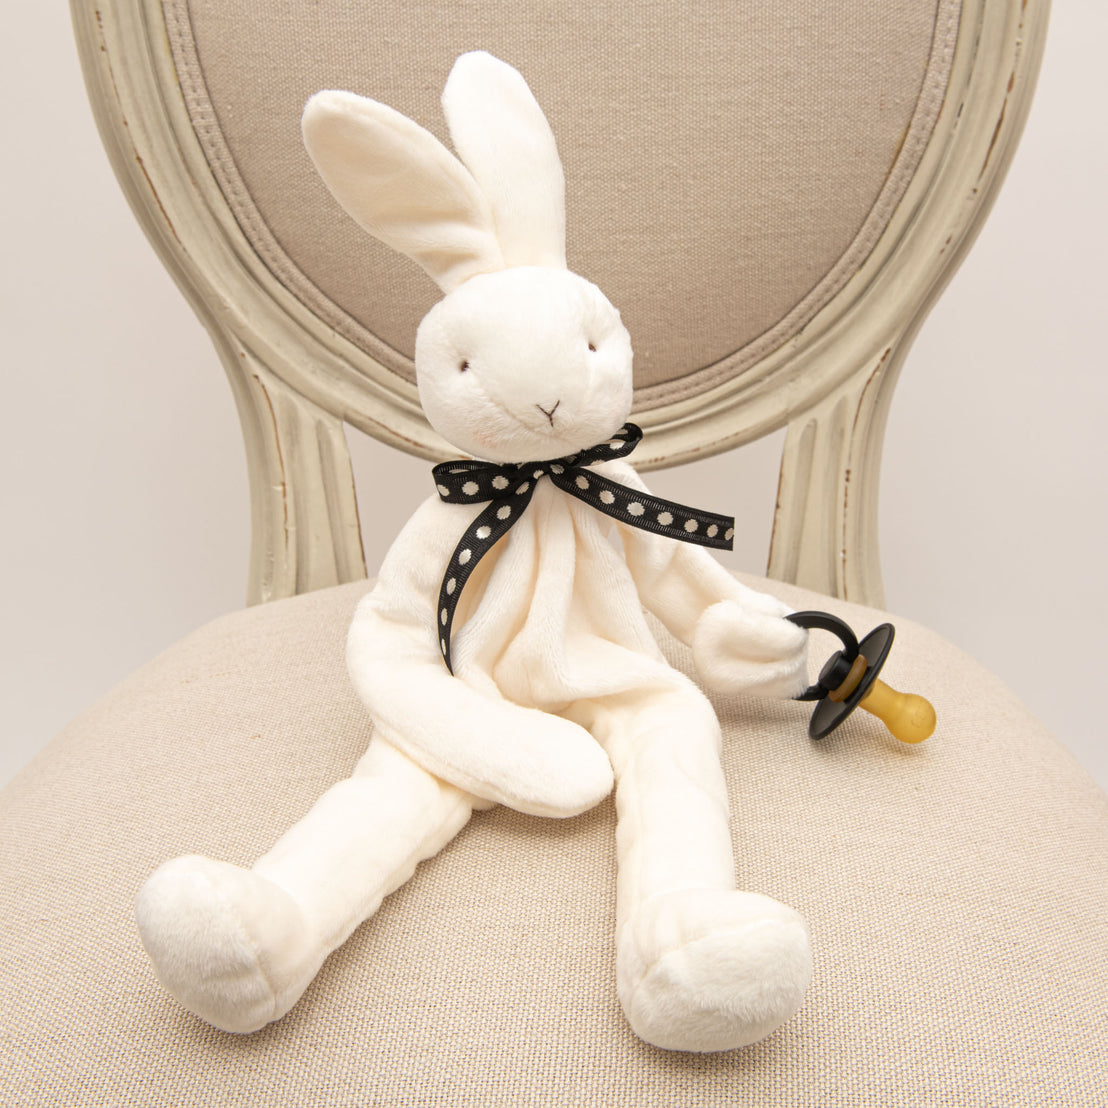 James Silly Bunny Buddy | Pacifier Holder